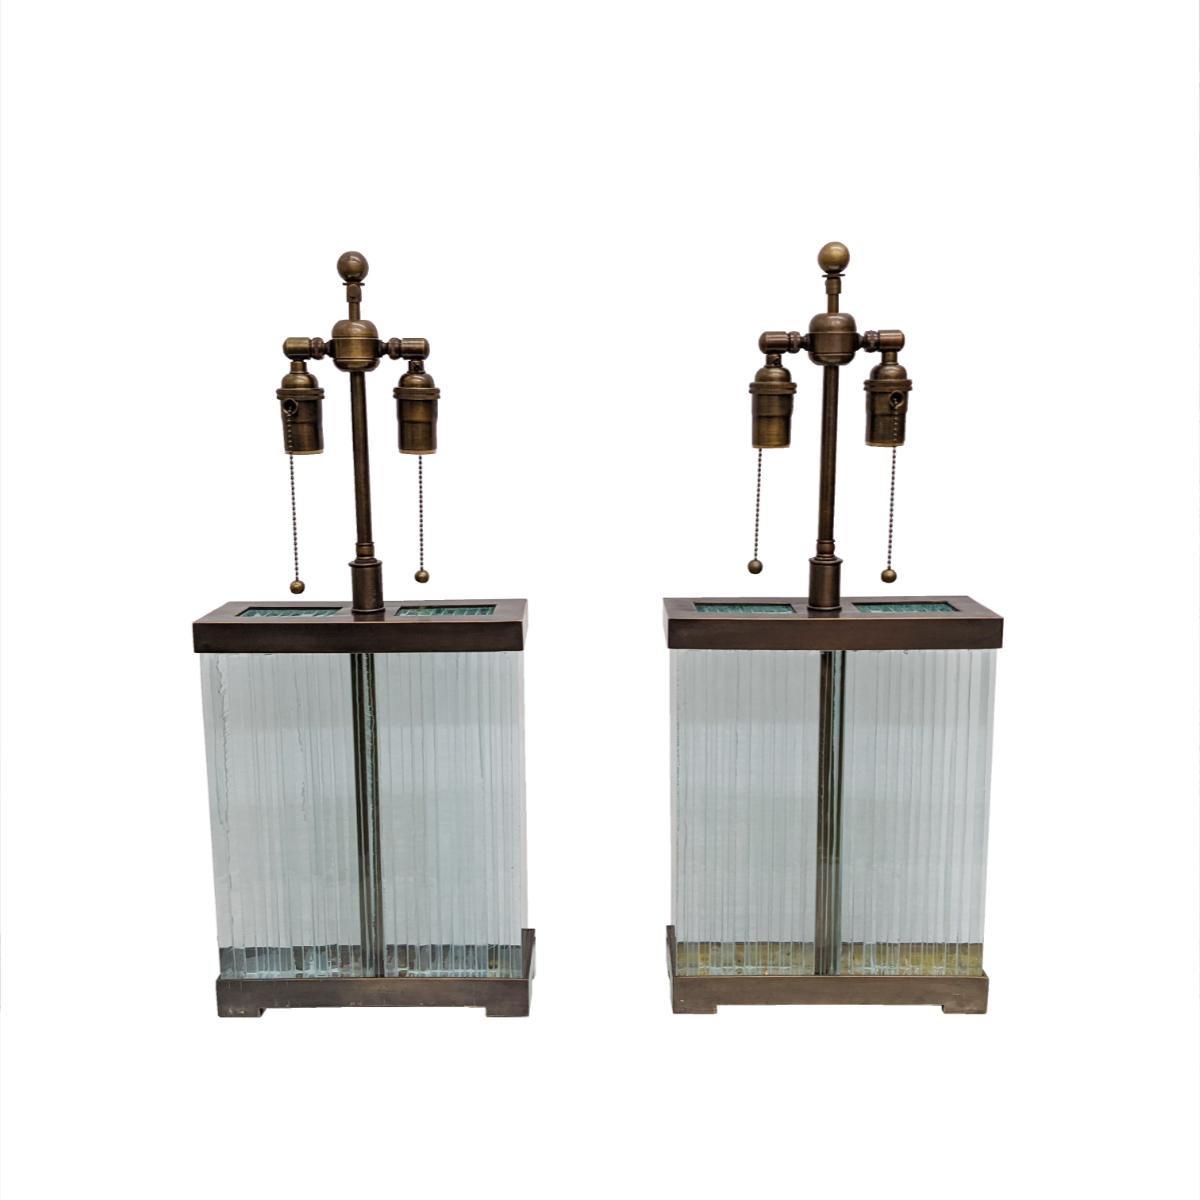 Pair of glass slab table lamps with patinated hardware in the manner of Jean Michel Frank by Marcelo Bessa.